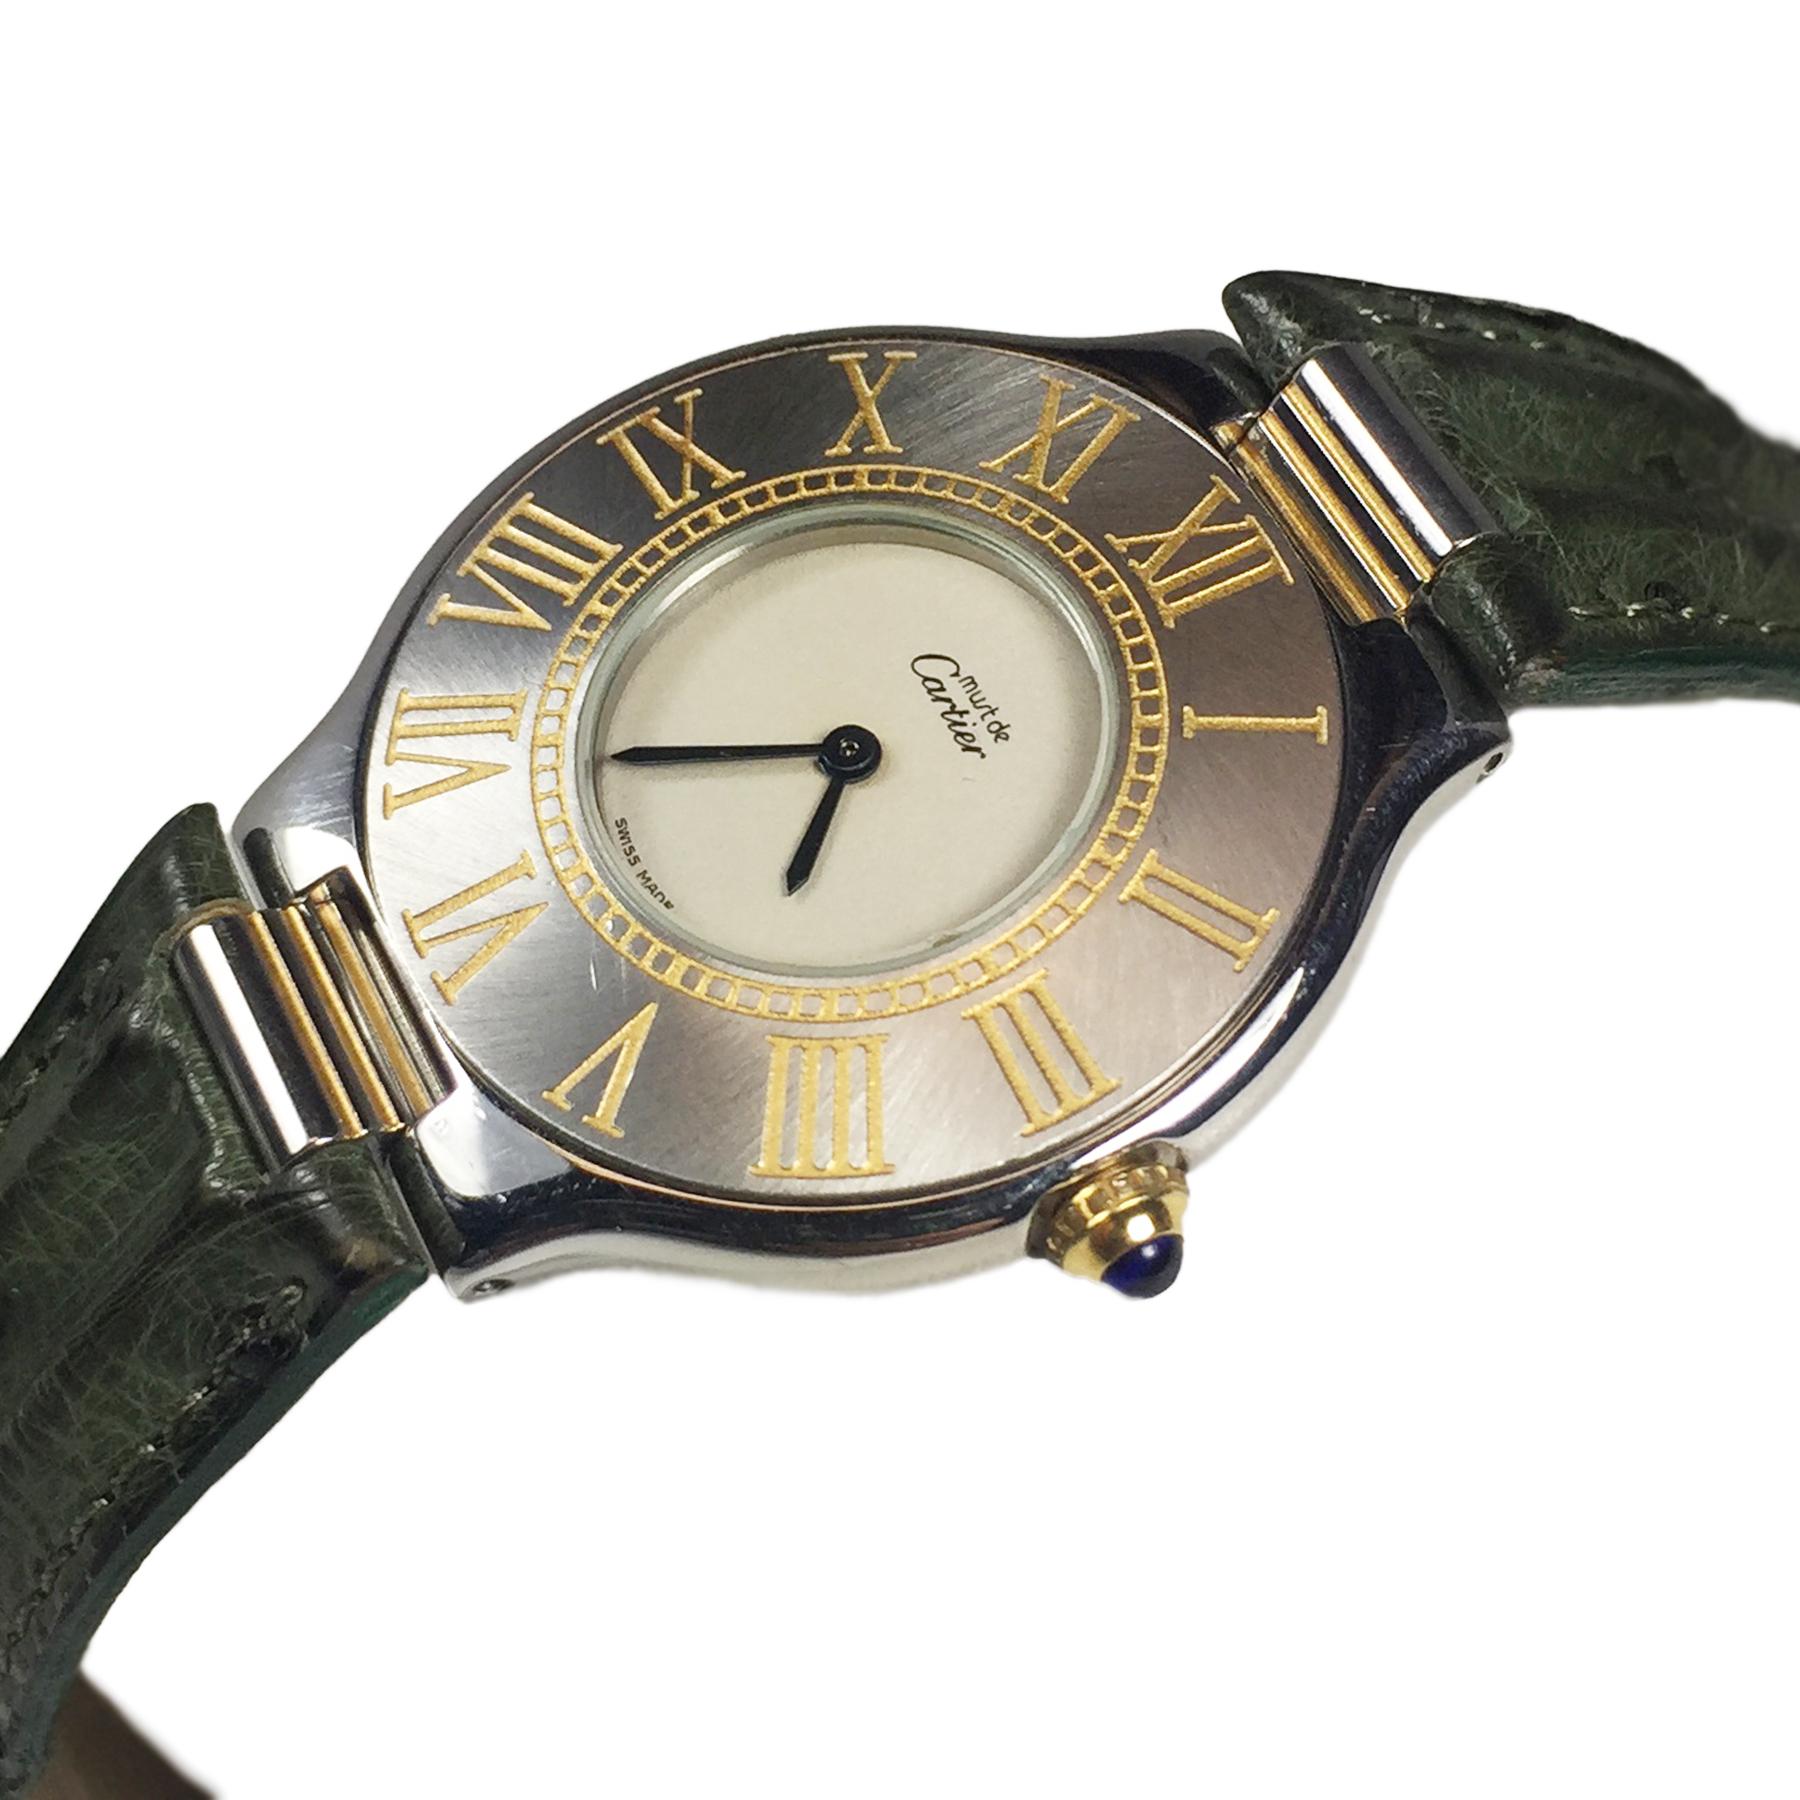 Circa 1990s Cartier, Must De cartier 21 Wrist watch, 31 MM Stainless Steel with Gold accents case and a Gold crown set with a
Sapphire. Quartz Movement, White Dial,  5/8 inch wide original Cartier padded Green strap with Cartier Deployment clasp.